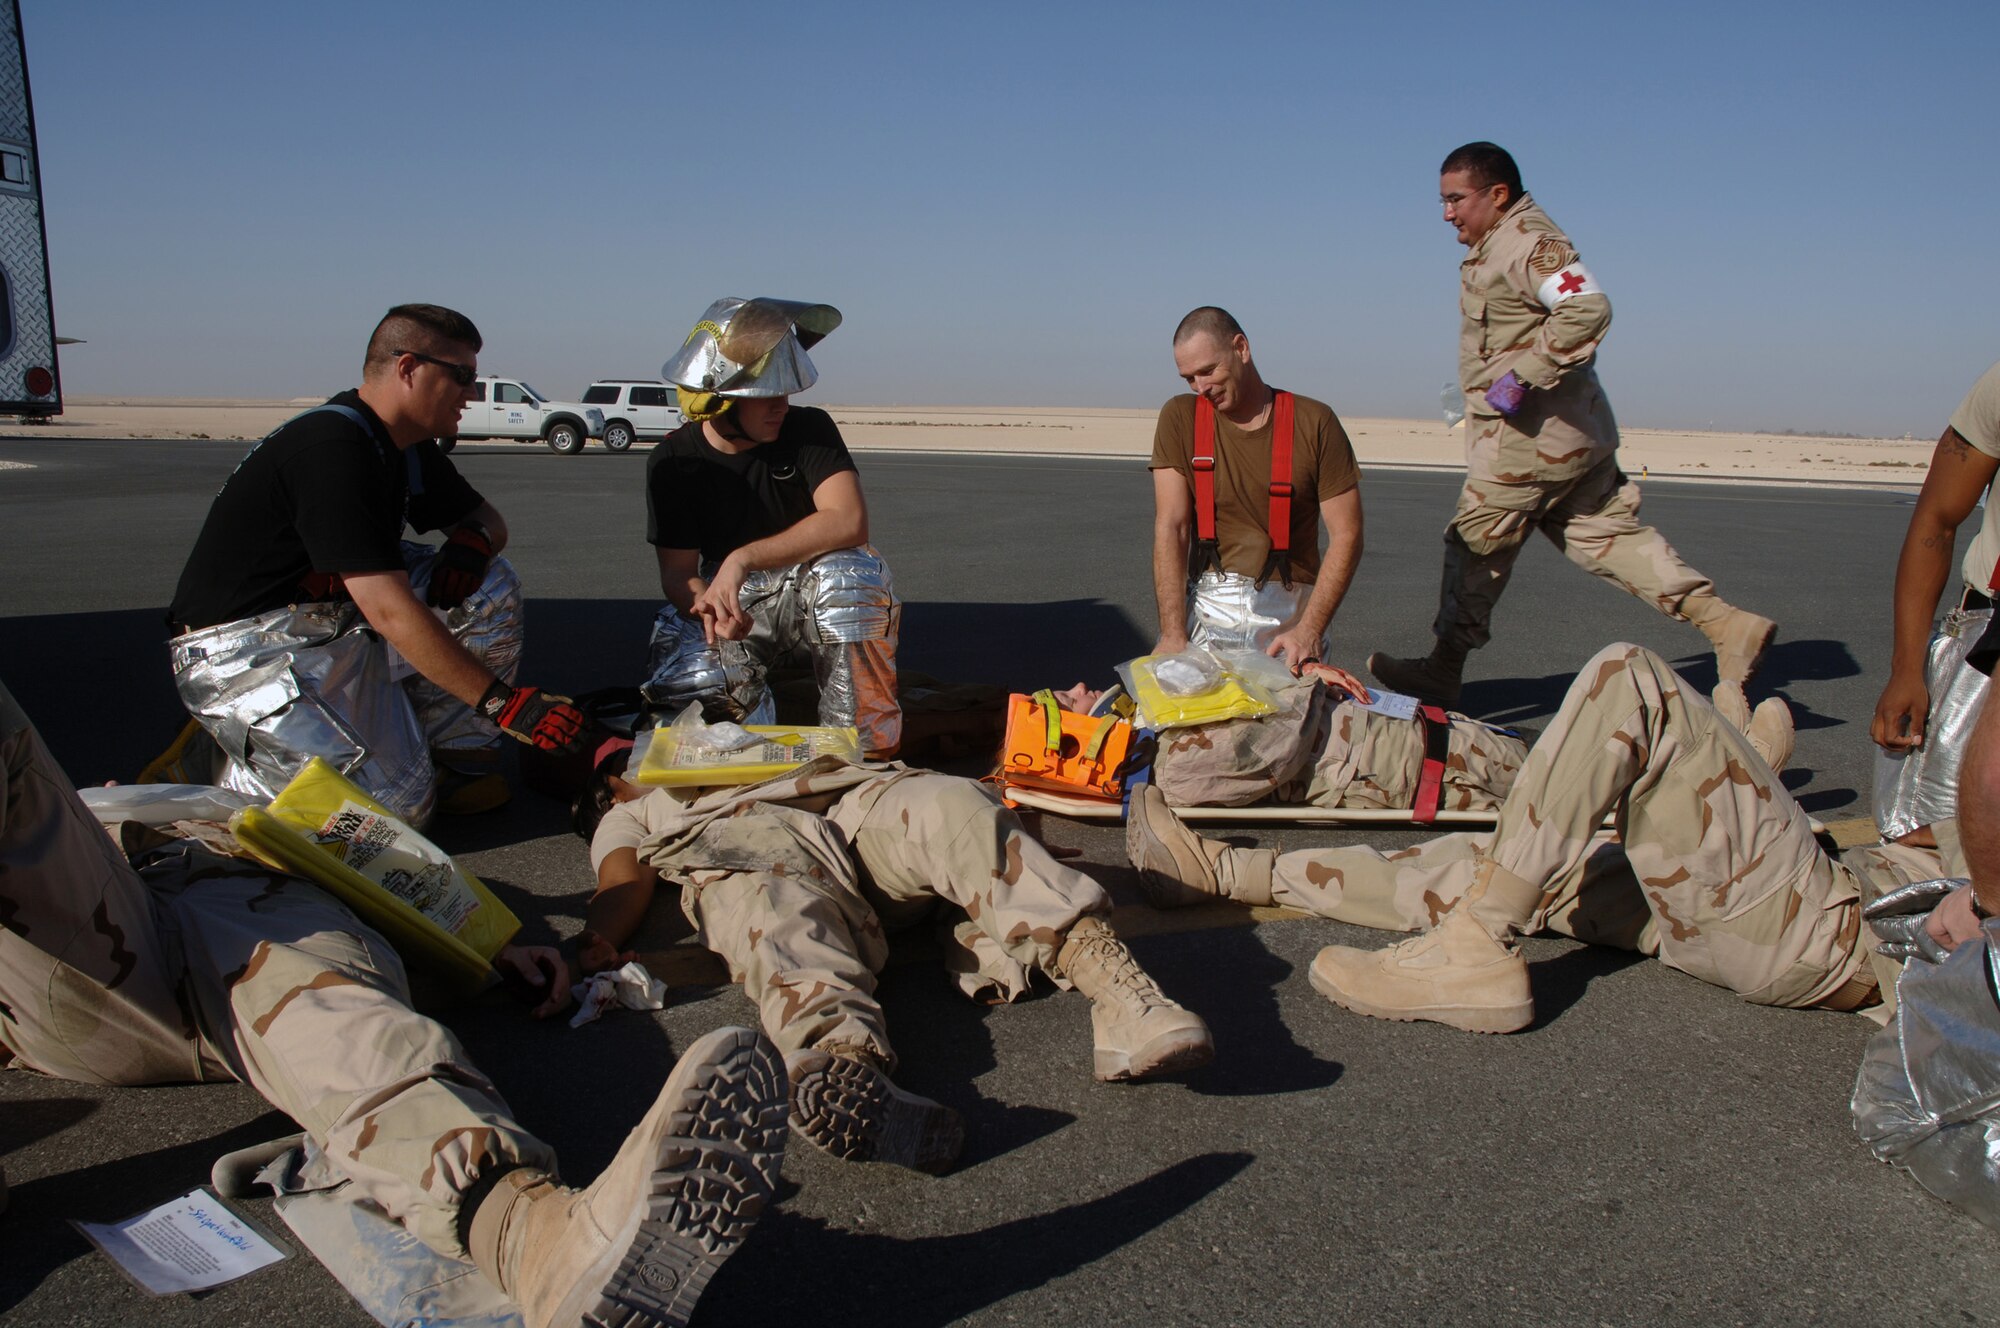 SOUTHWEST ASIA - Emergency services Airmen tend to victims following an aircraft incident during a Major Accident Response Exercise at a Southwest Asia air base Dec. 14.  (U. S. Air Force photo/Staff Sgt. Douglas Olsen)